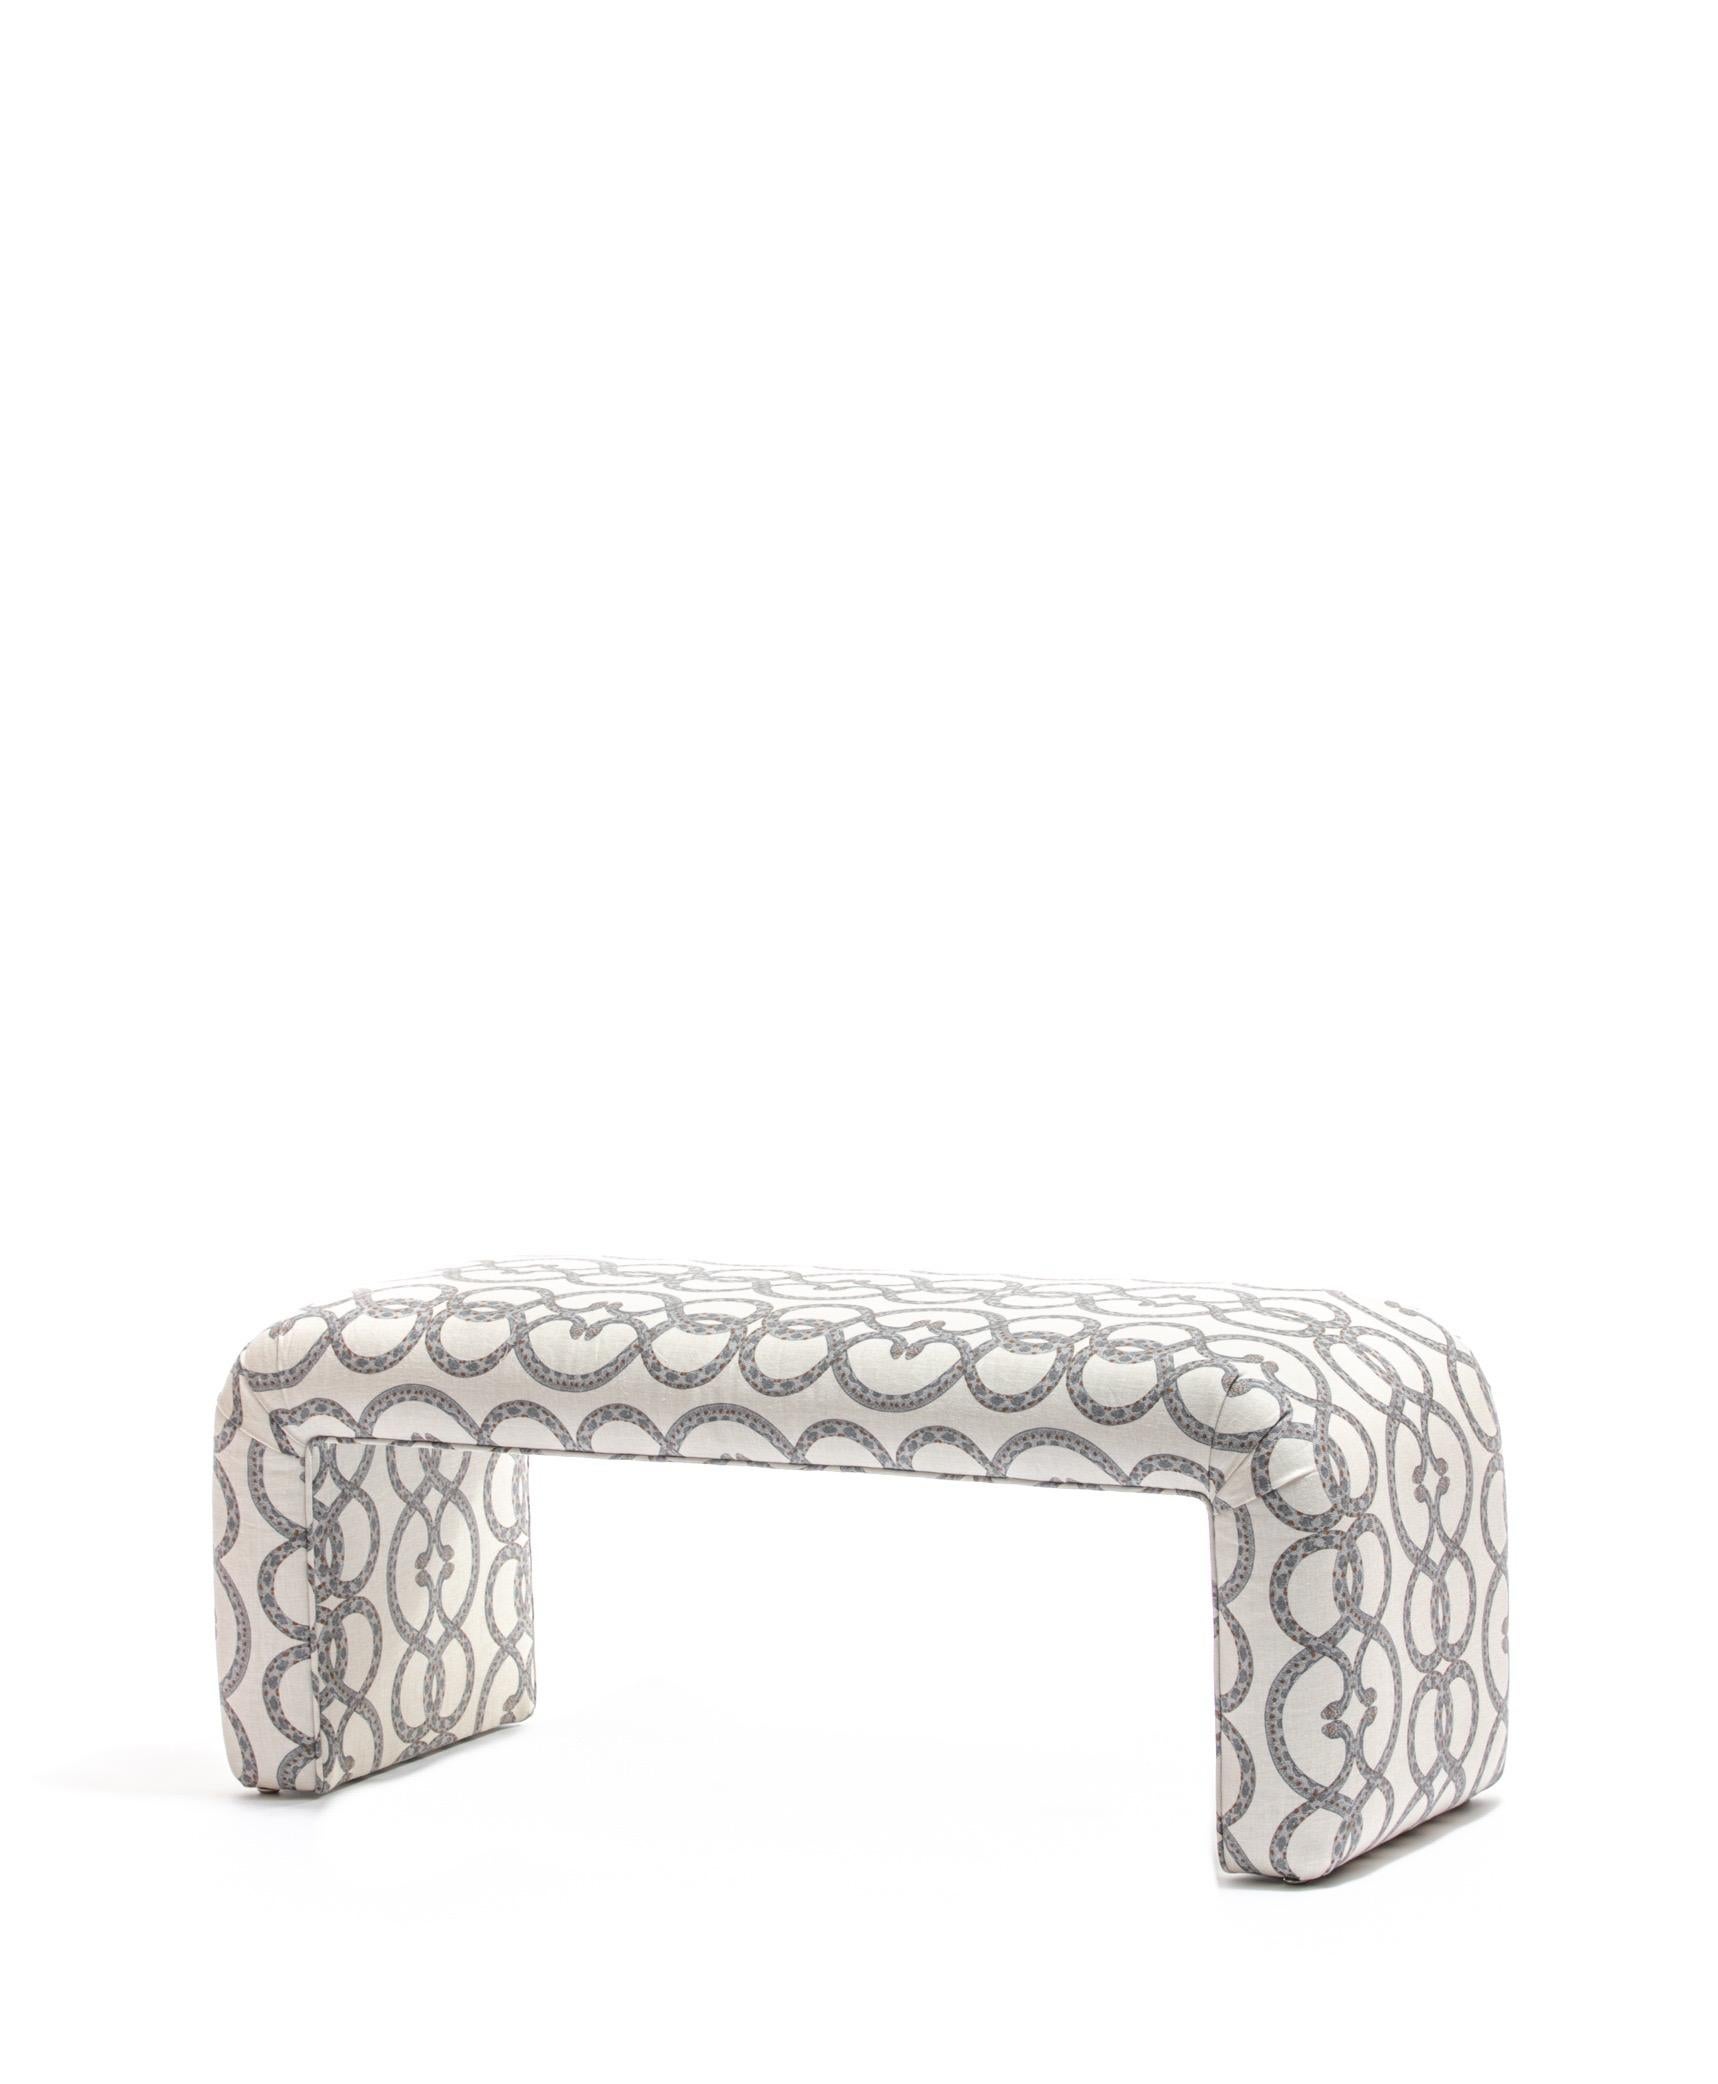 American Karl Springer Style Waterfall Bench in Snake Pattern Ivory Linen Fabric